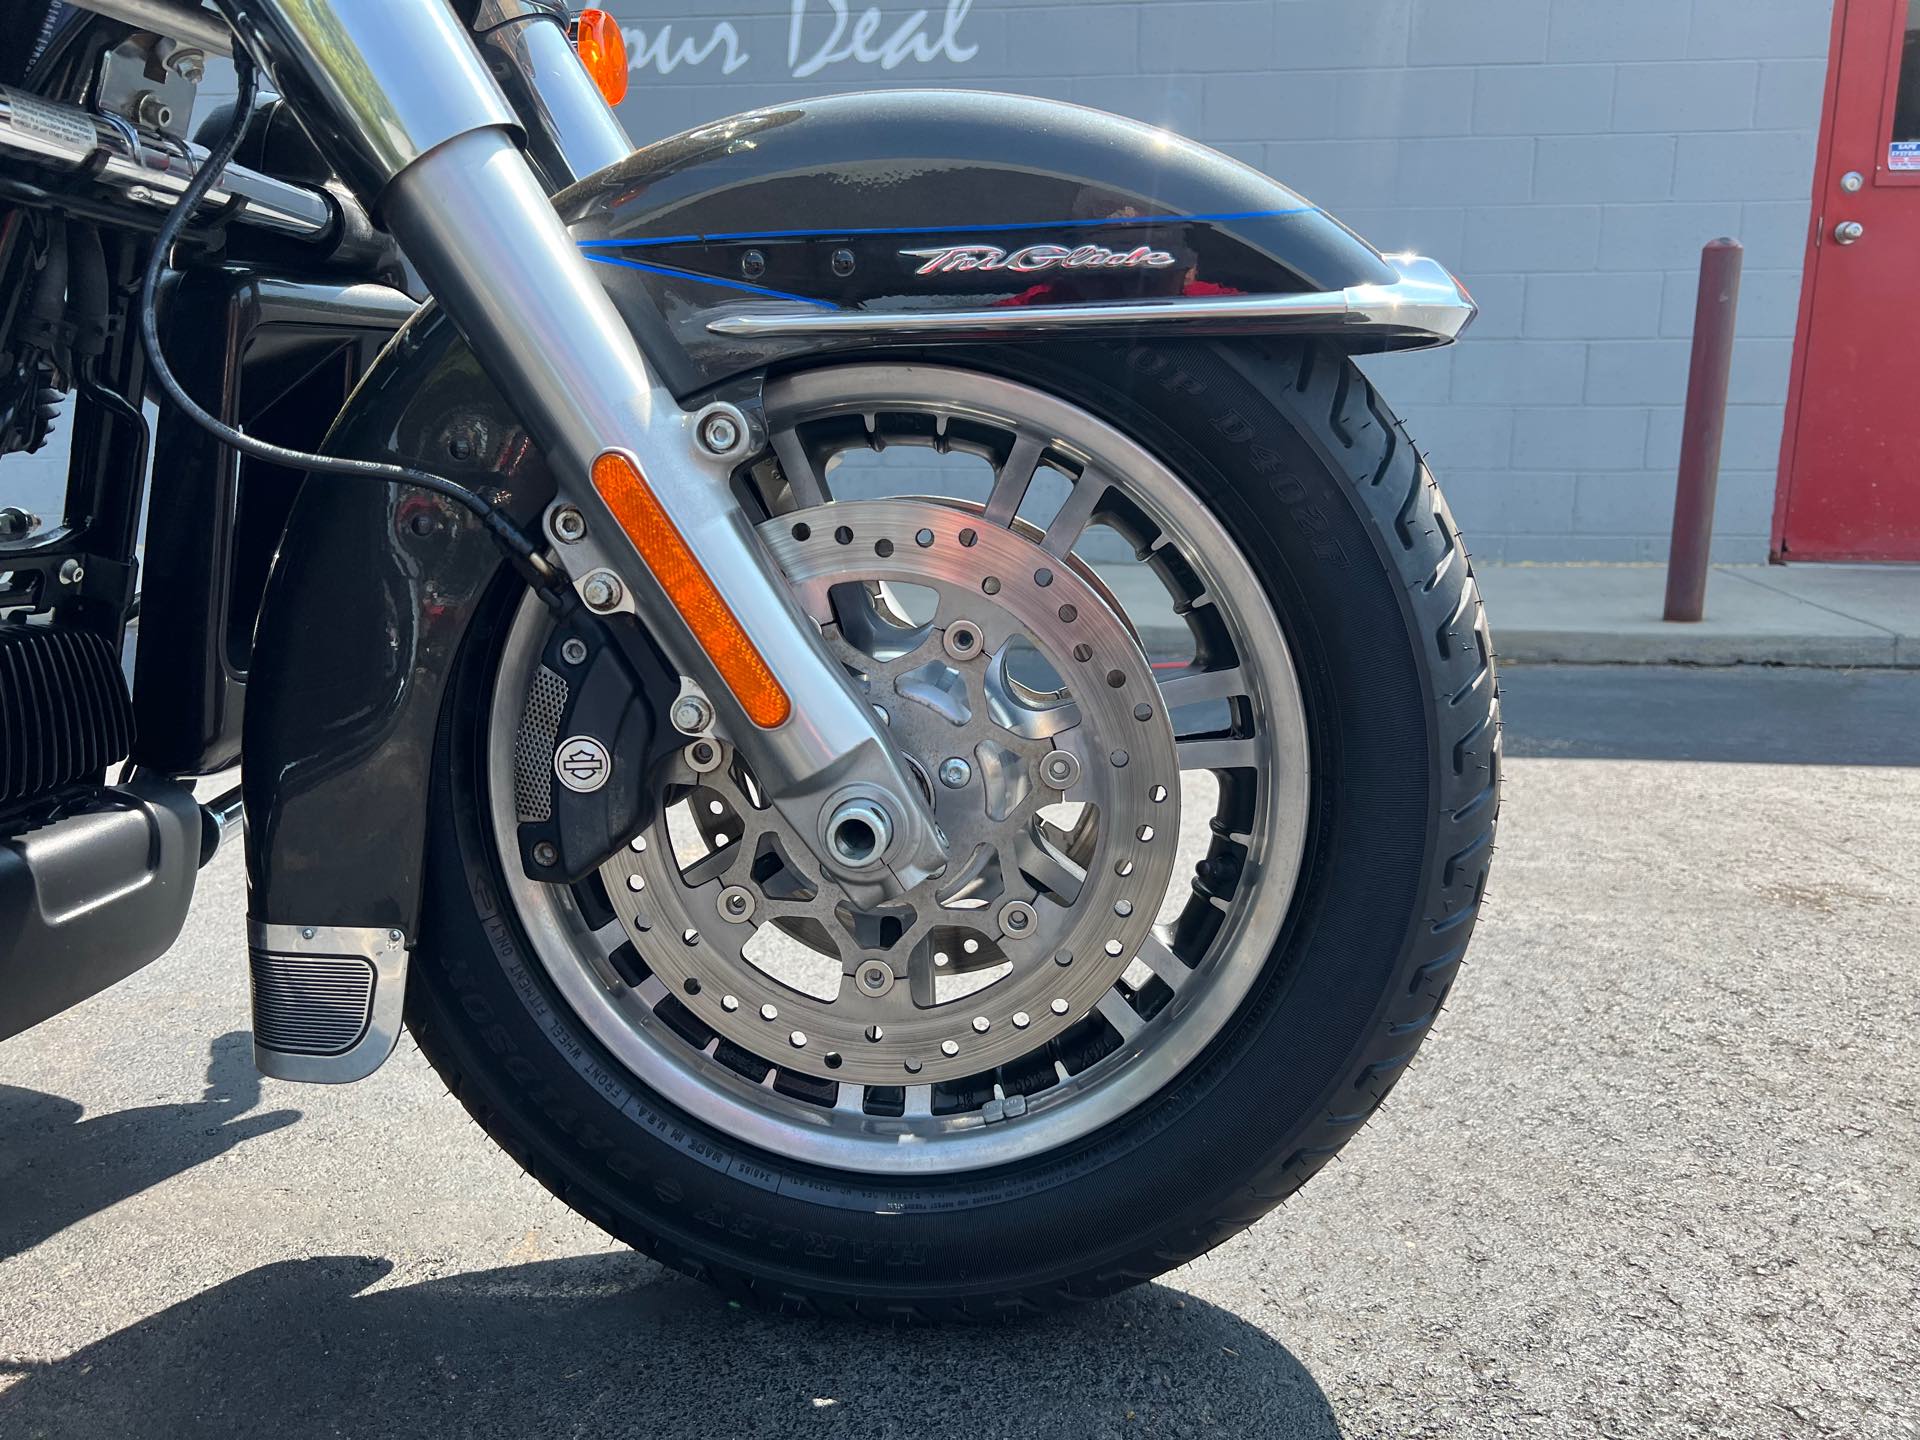 2019 Harley-Davidson Trike Tri Glide Ultra at Aces Motorcycles - Fort Collins